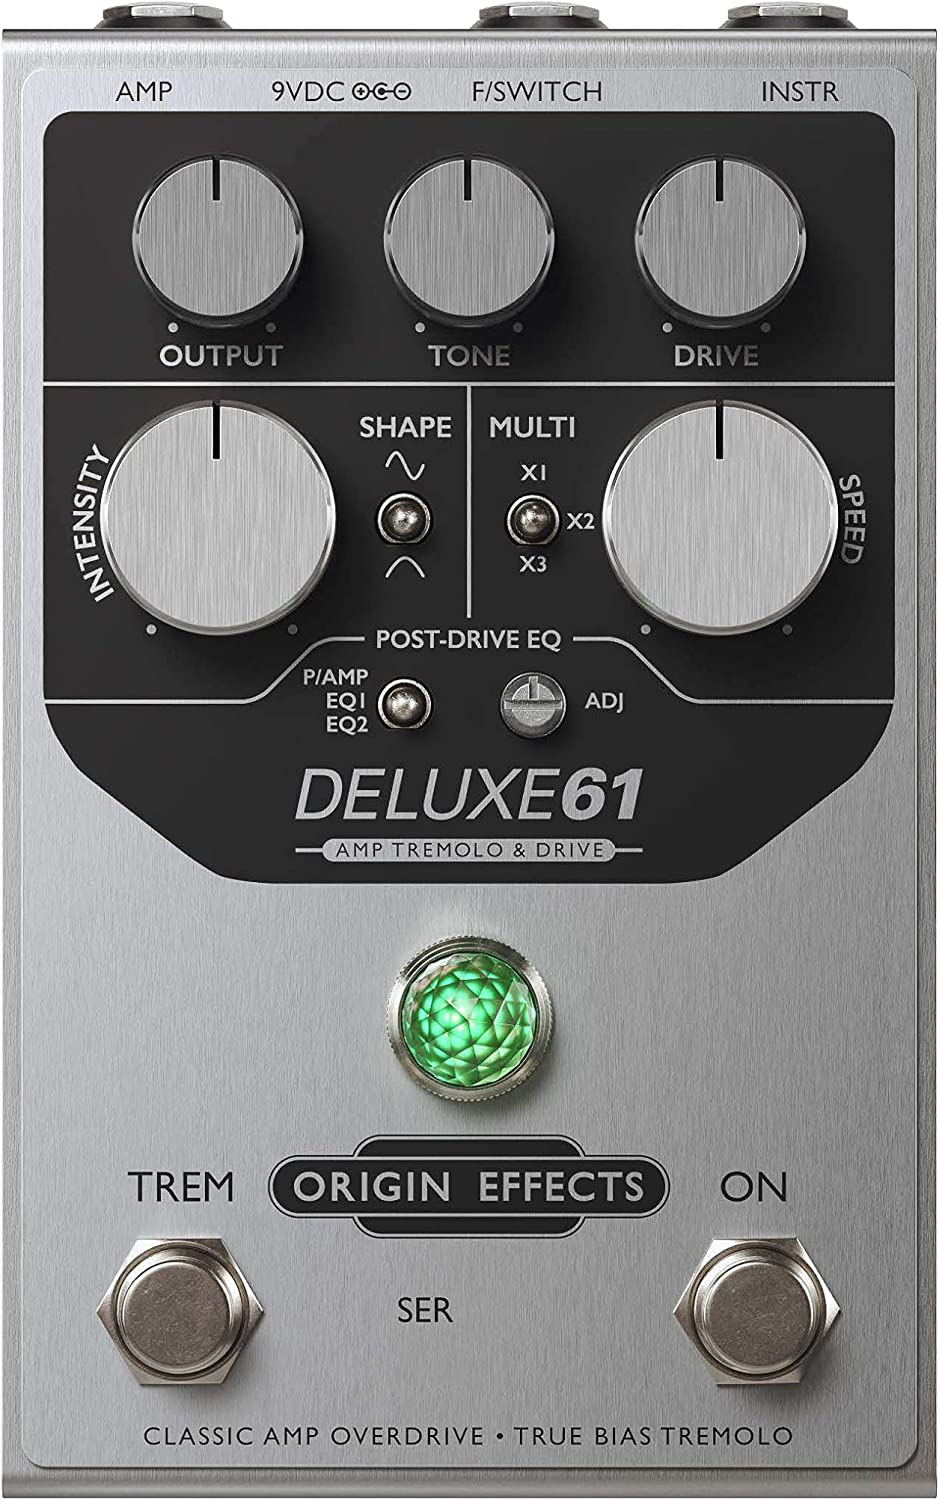 Origin Effects DELUXE61 Amp Tremolo & Drive Pedal on a white background